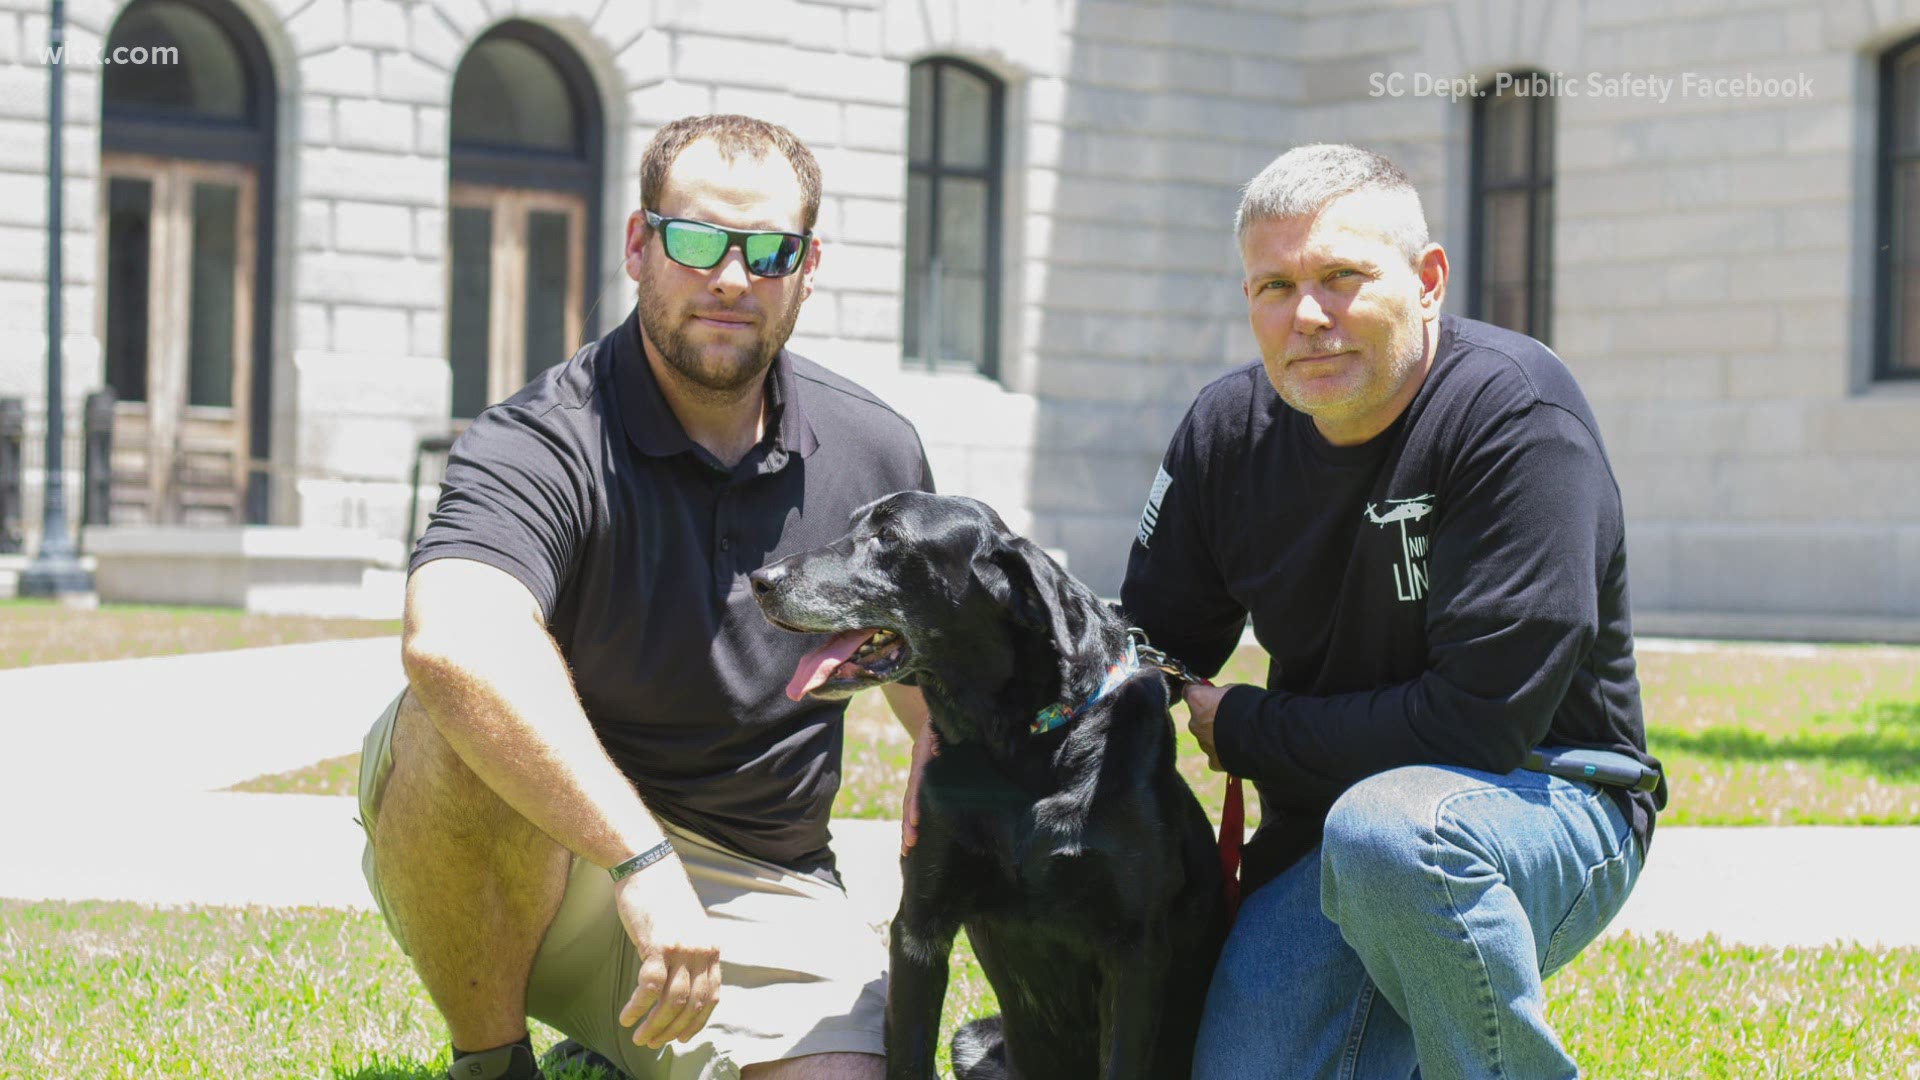 The dog retired from the military and was adopted by the SC Bureau of Protective services and after six years retired and was reunited with his Marine handler.